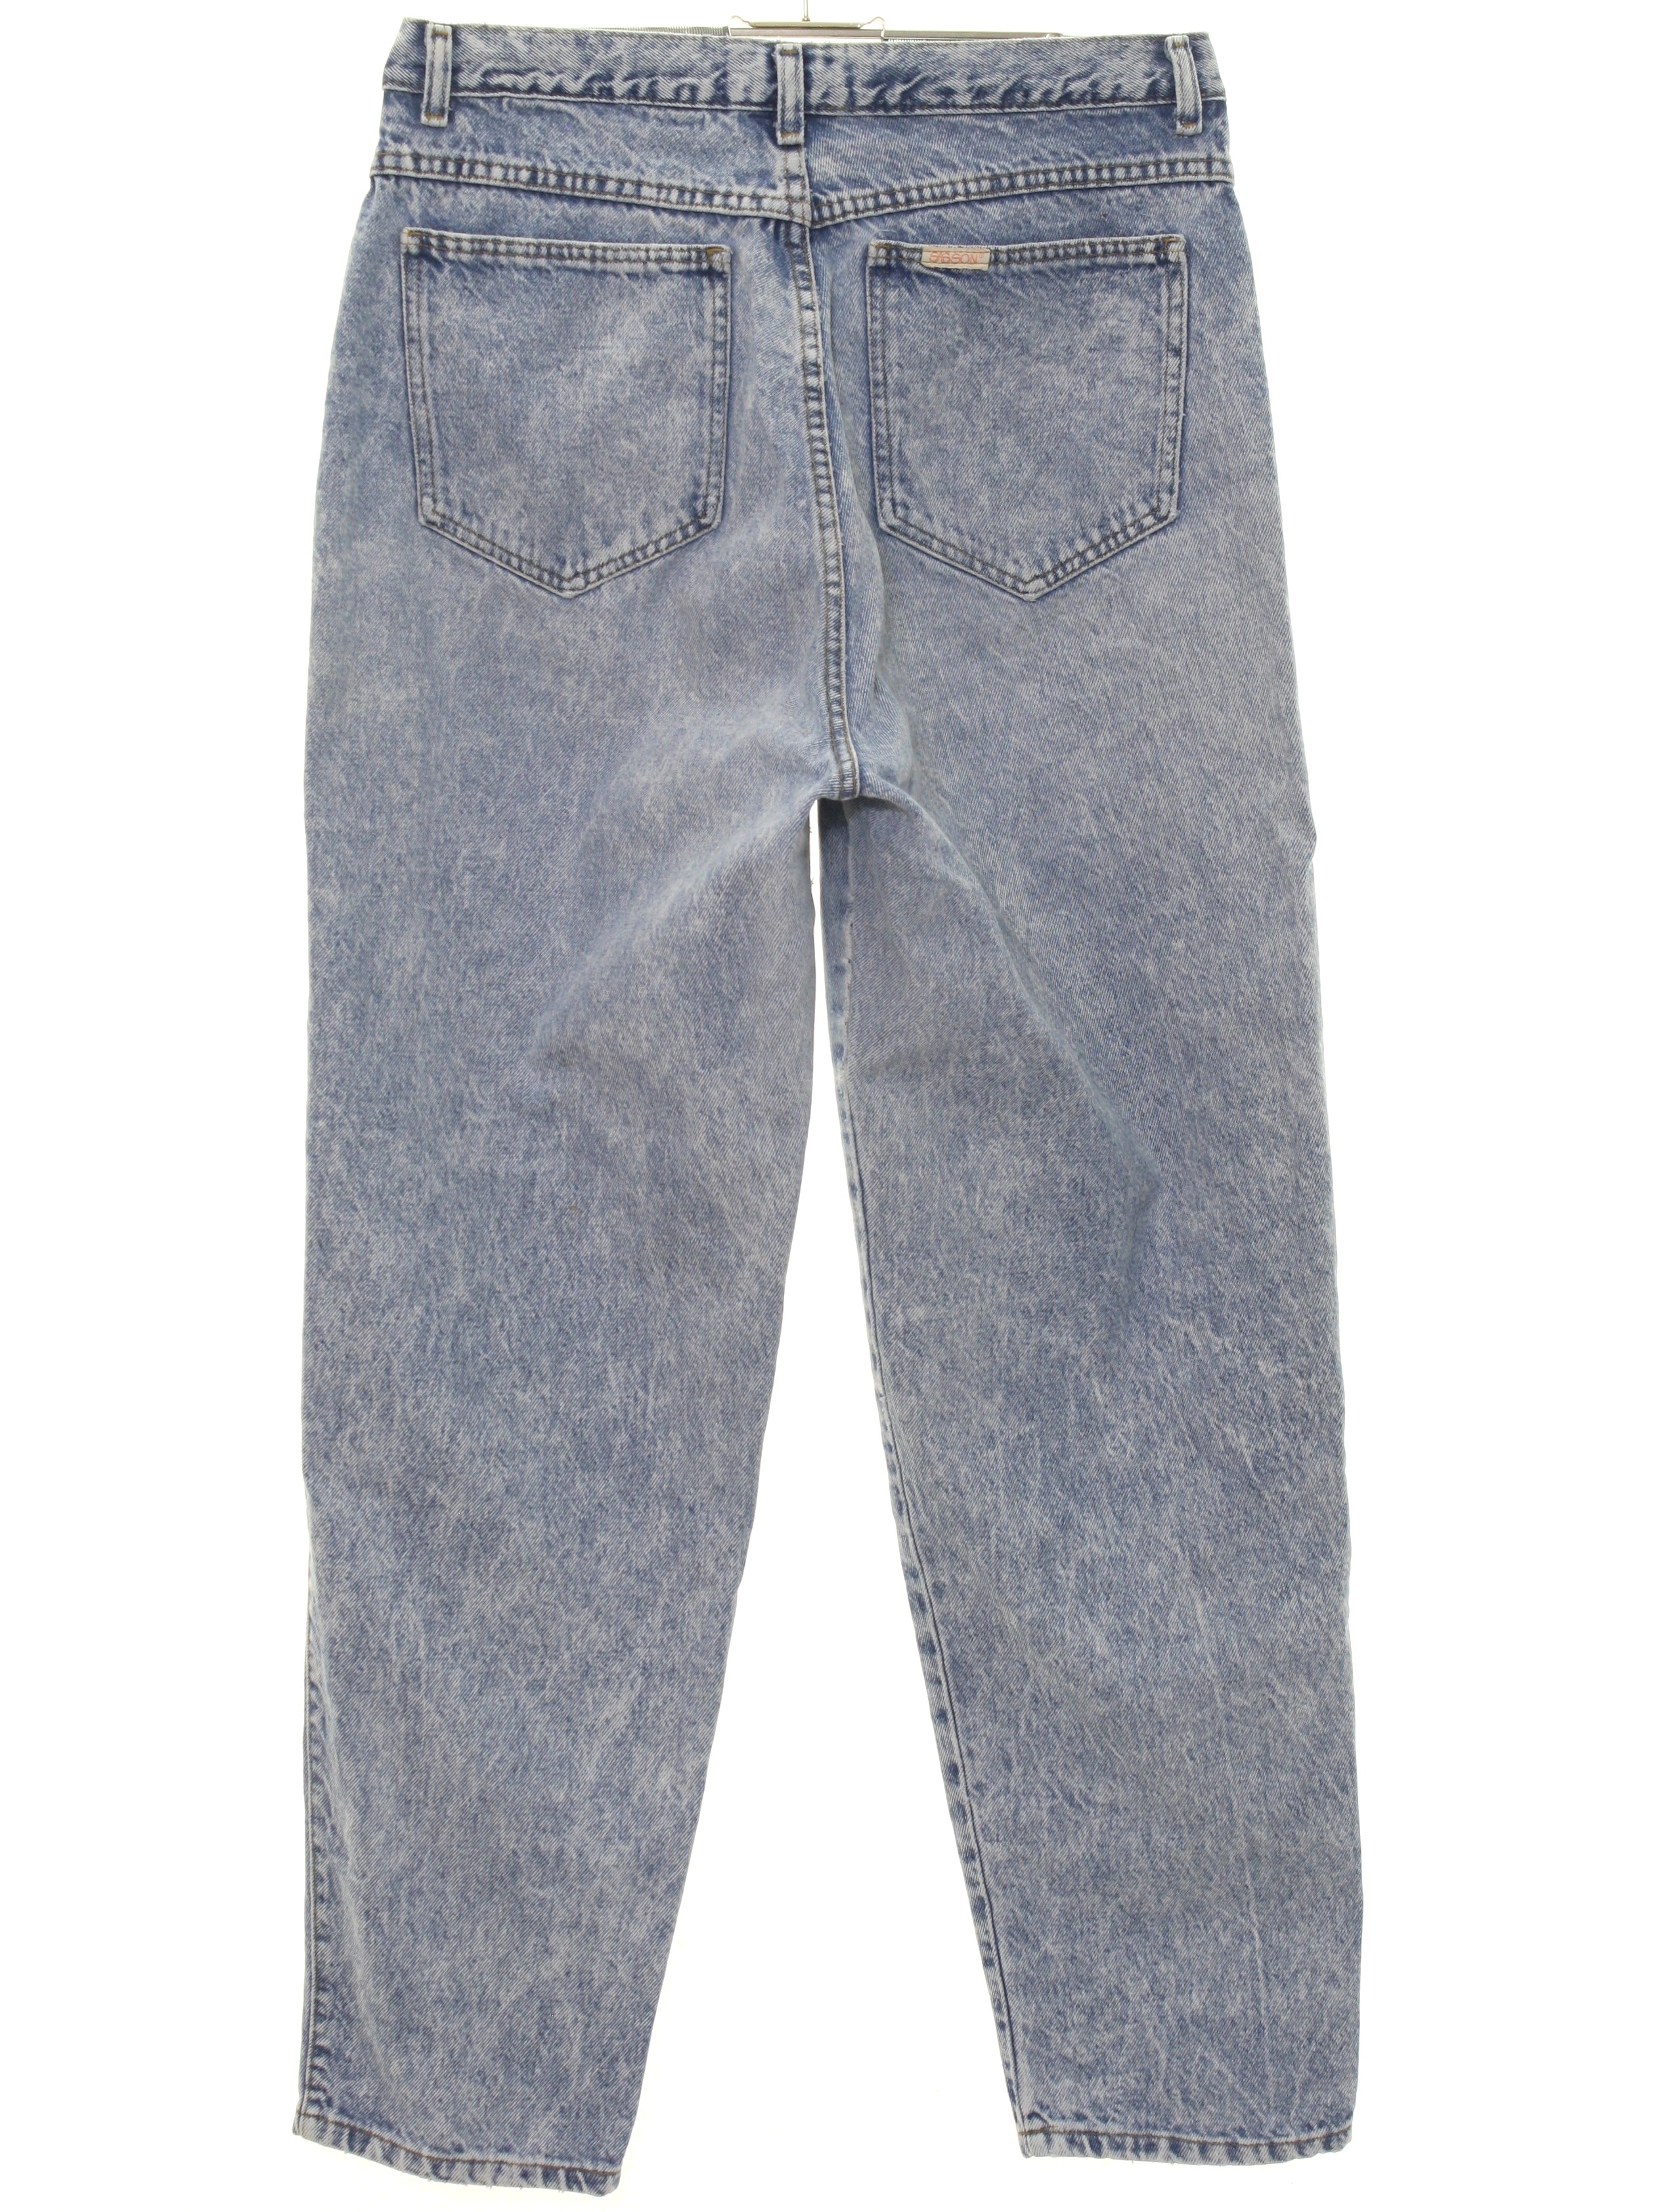 Vintage Sasson 1980s Pants: Late 80s -Sasson- Womens stone washed blue ...